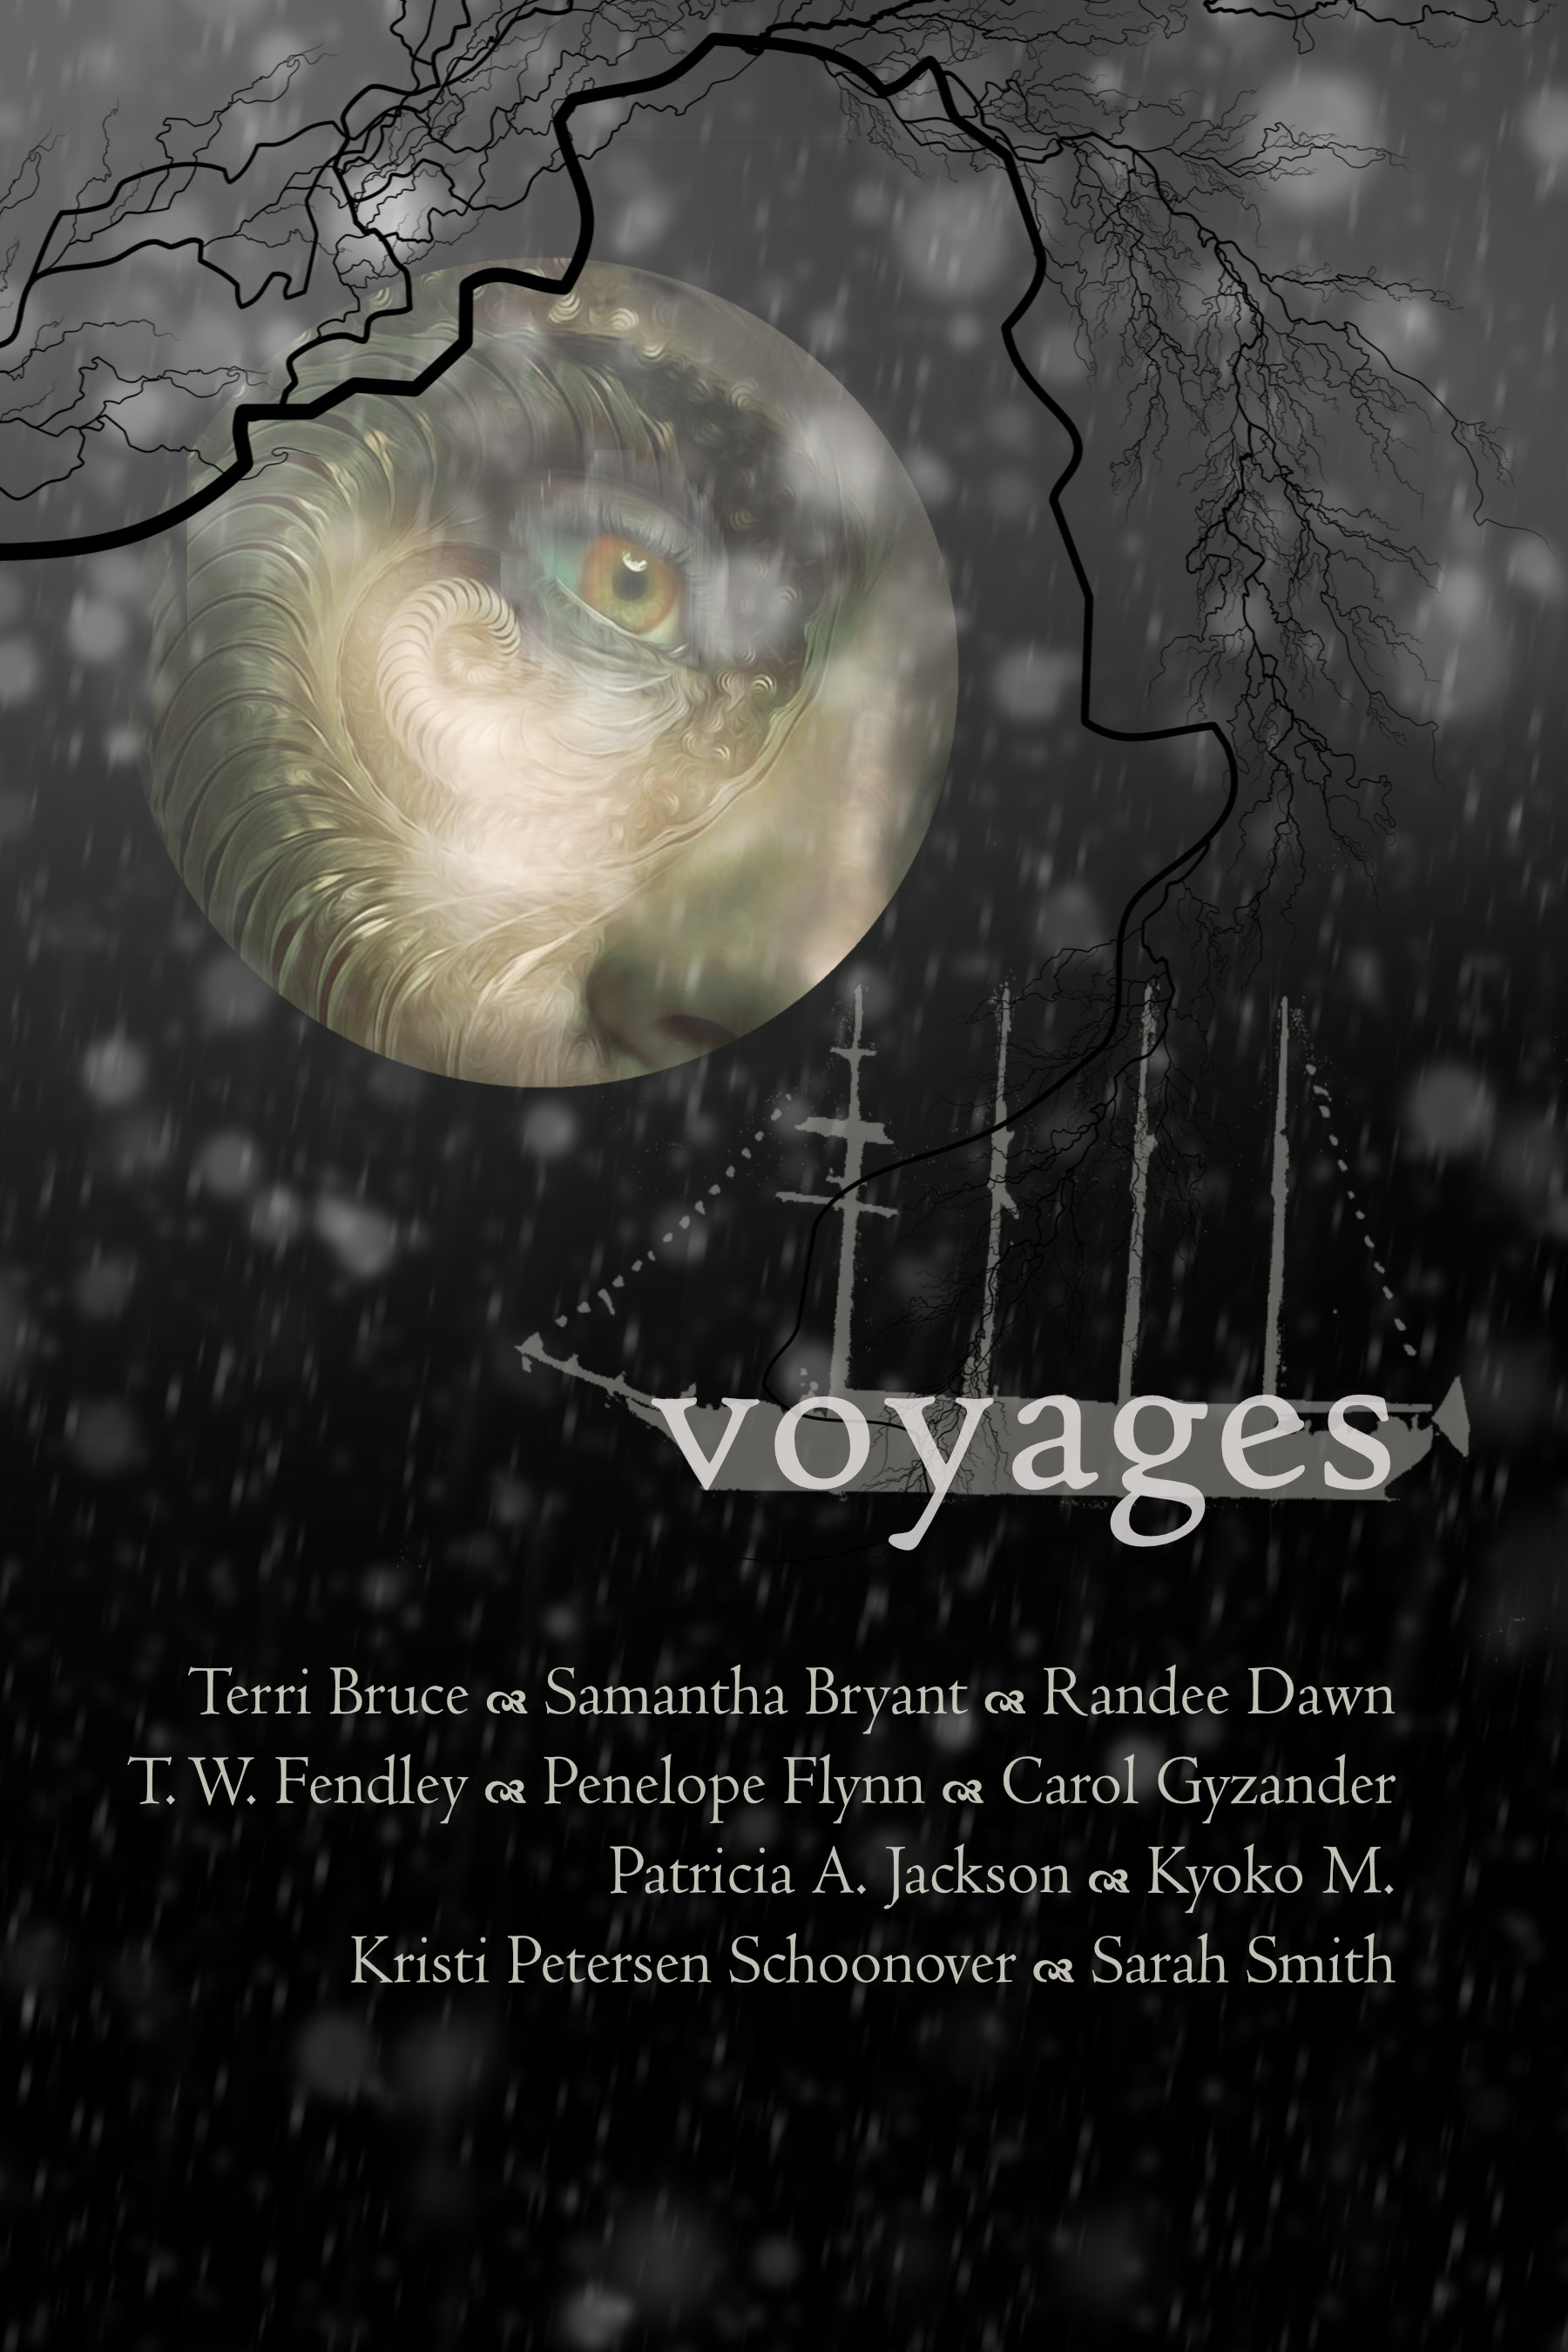 Voyages cover final